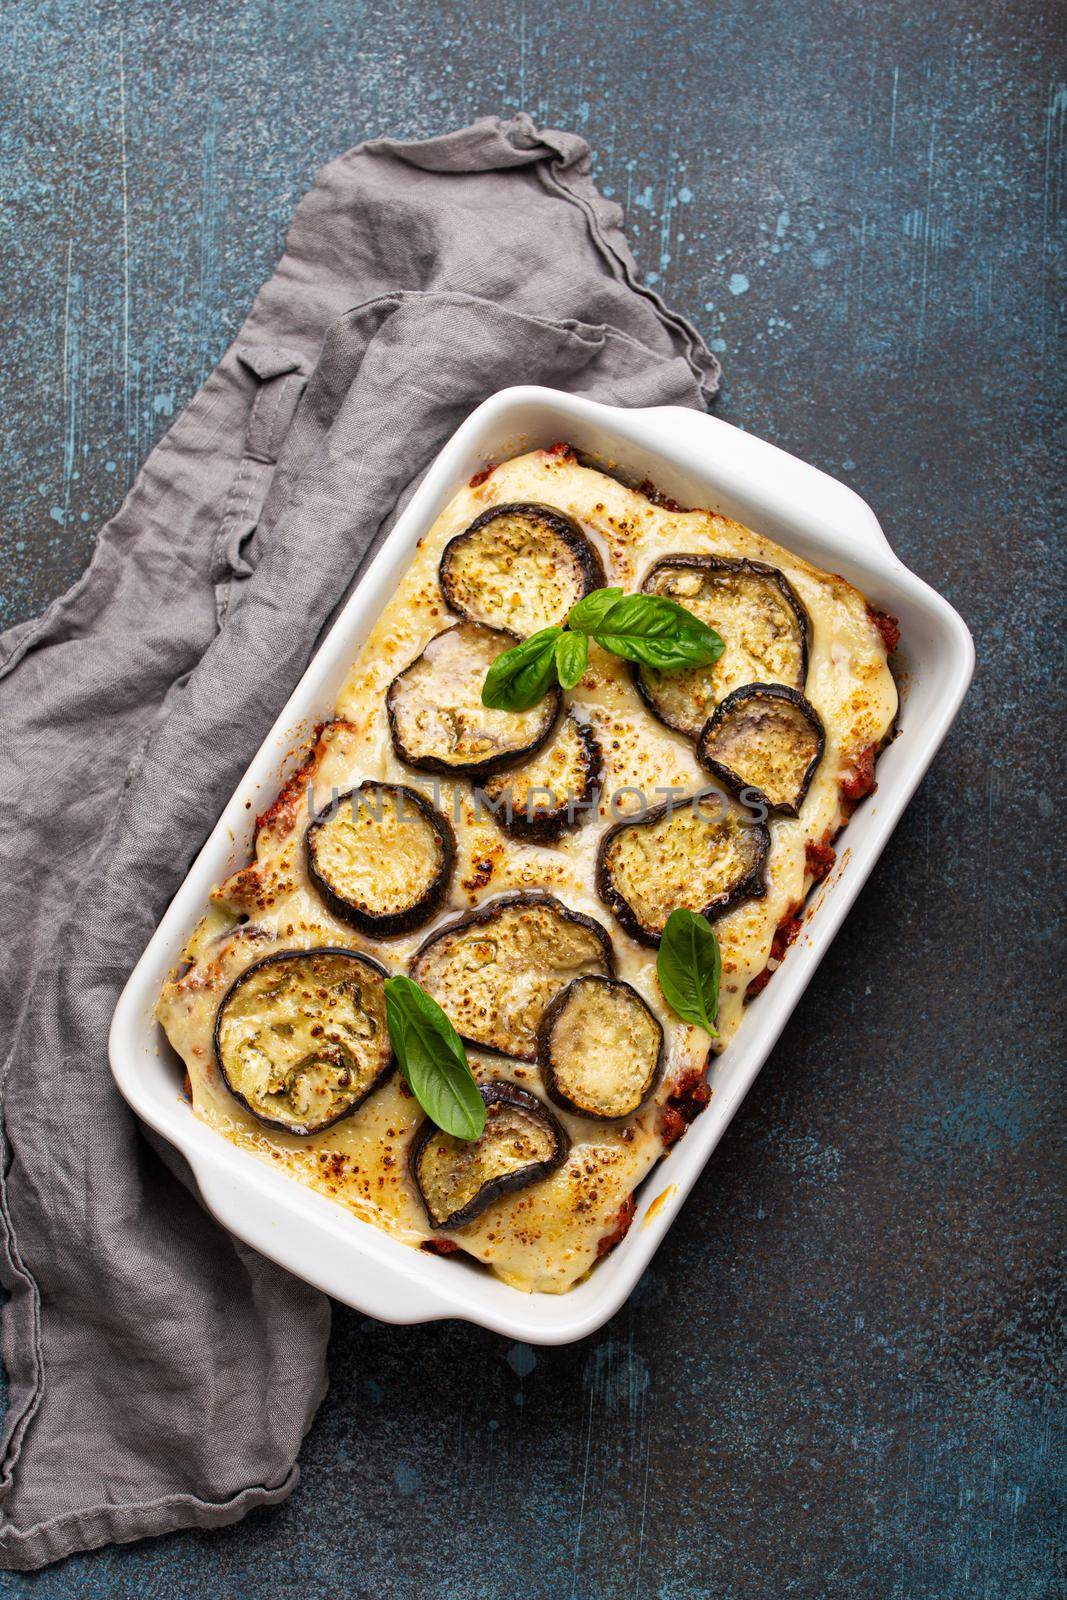 Greek baked dish Moussaka from above by its_al_dente